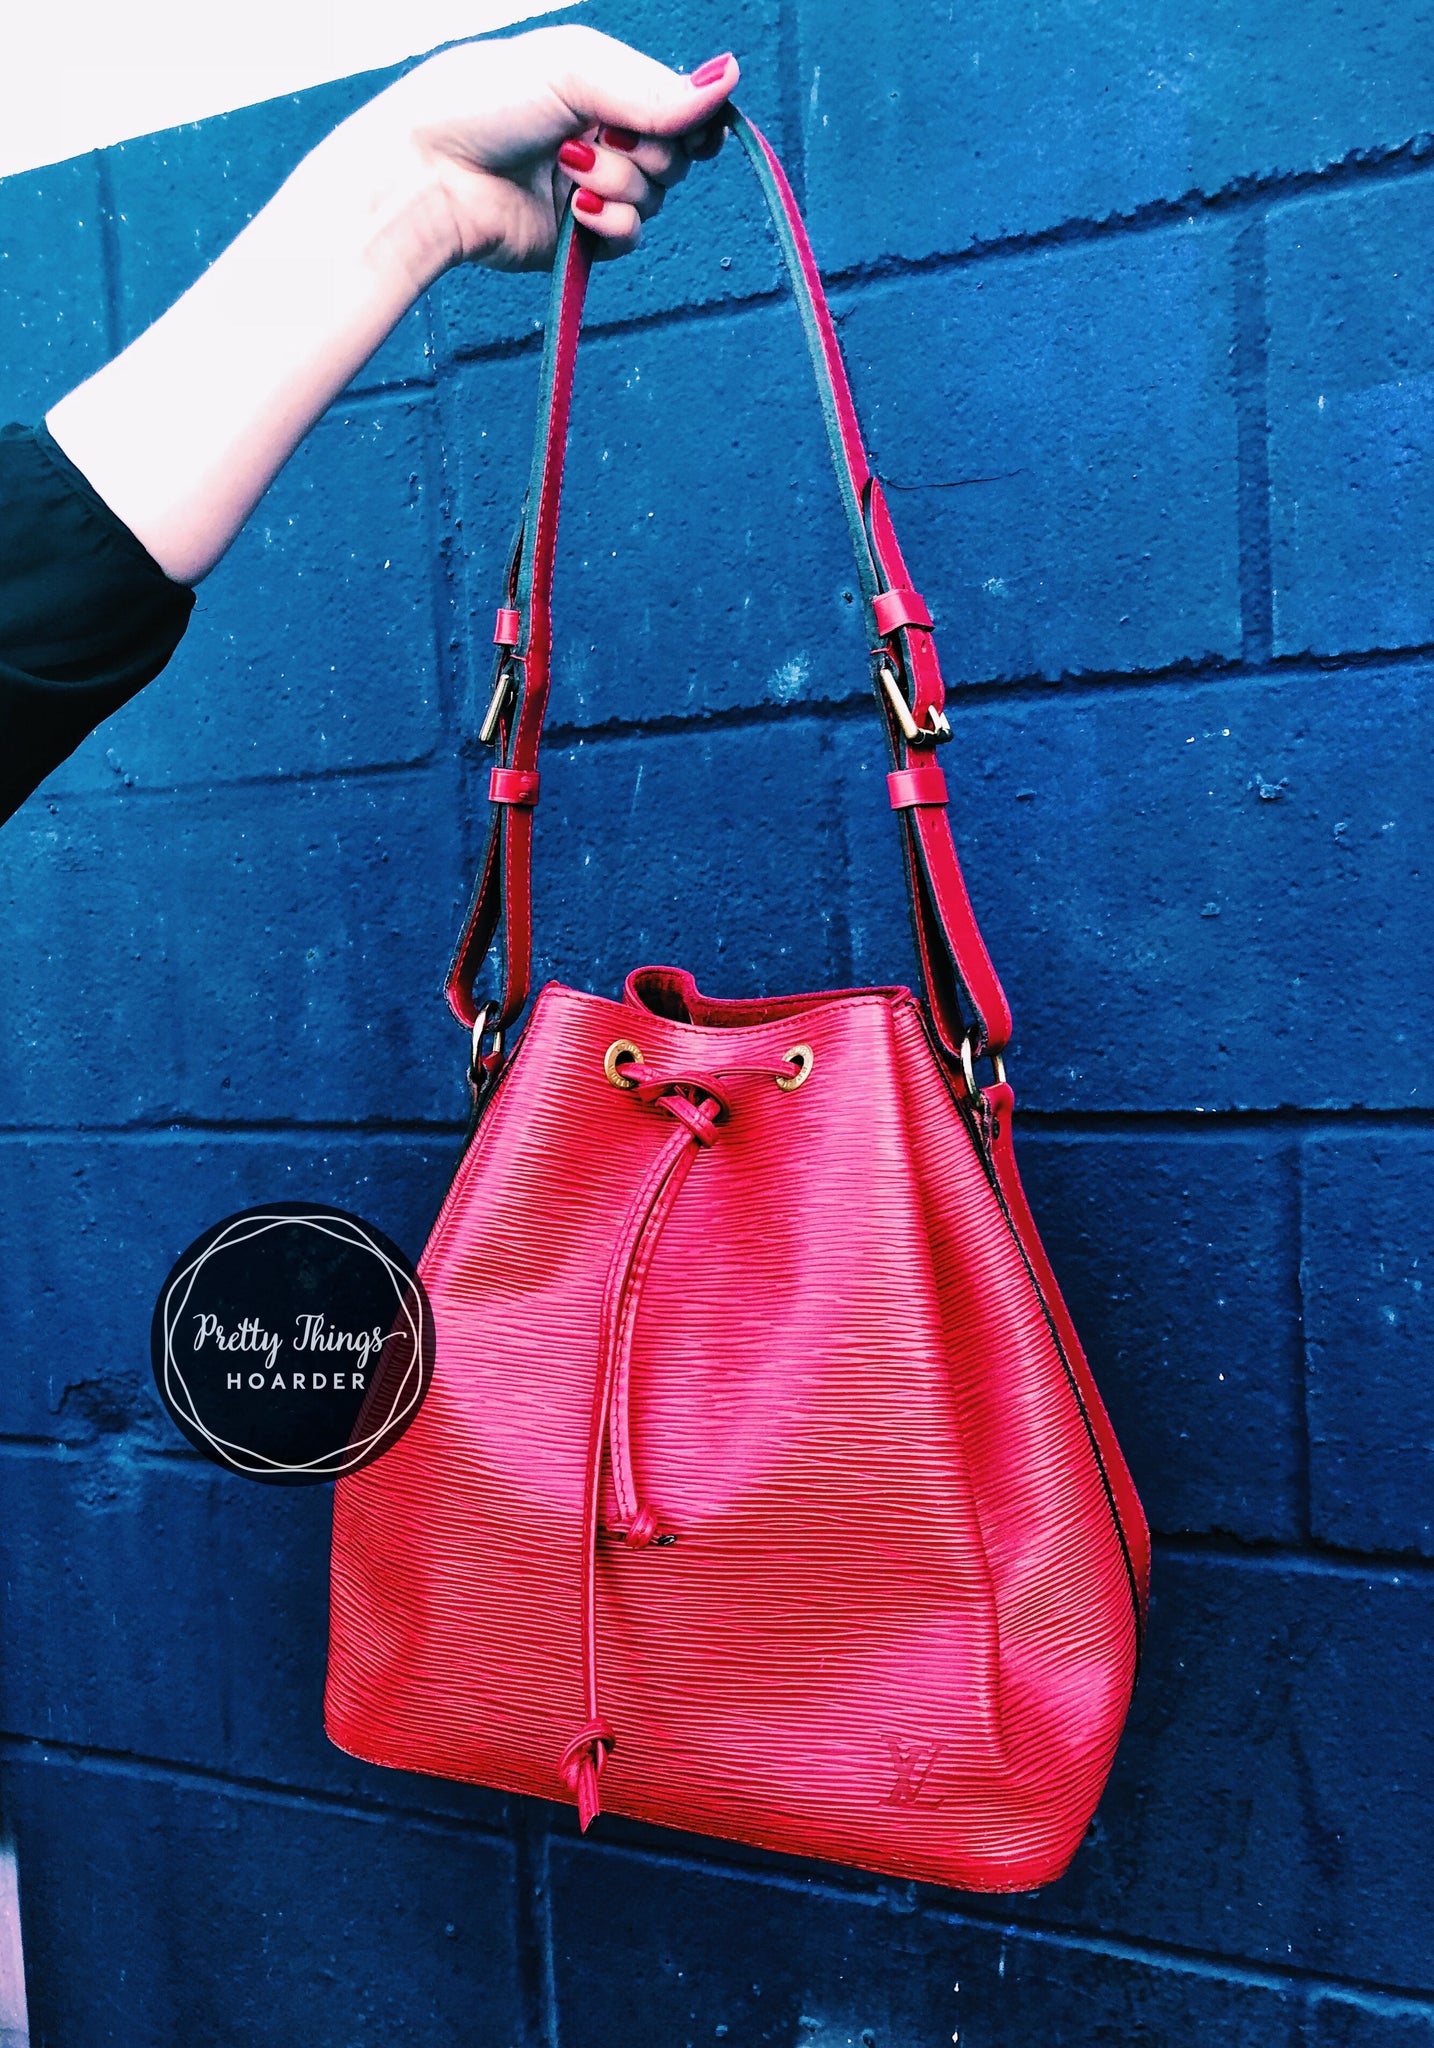 Louis Vuitton Noe PM Bucket Bag in Red EPI Leather, France 1994.